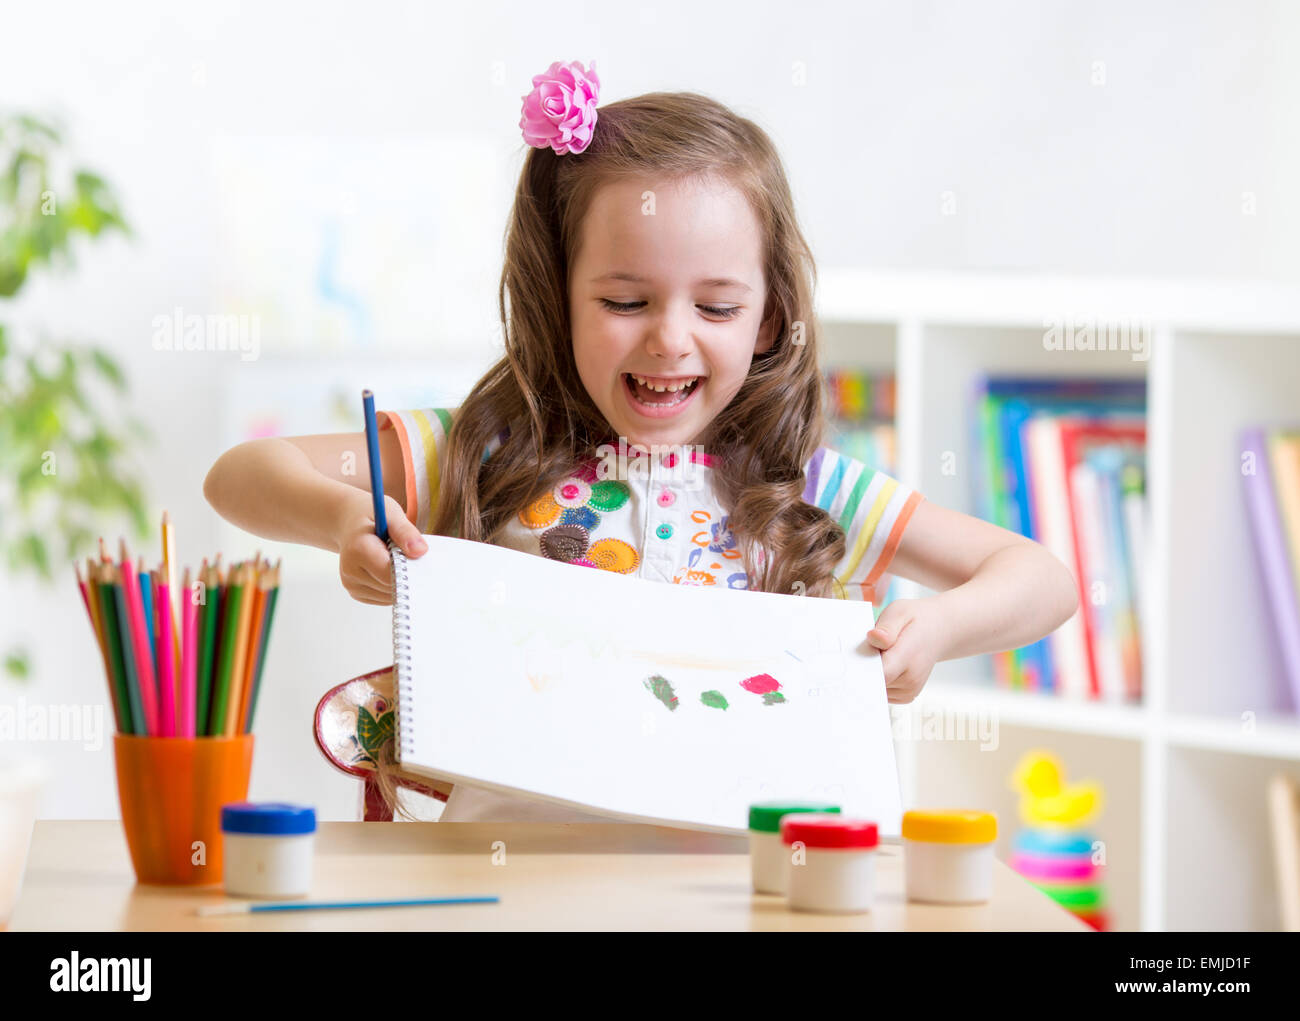 child girl painting and showing painting in nursery Stock Photo